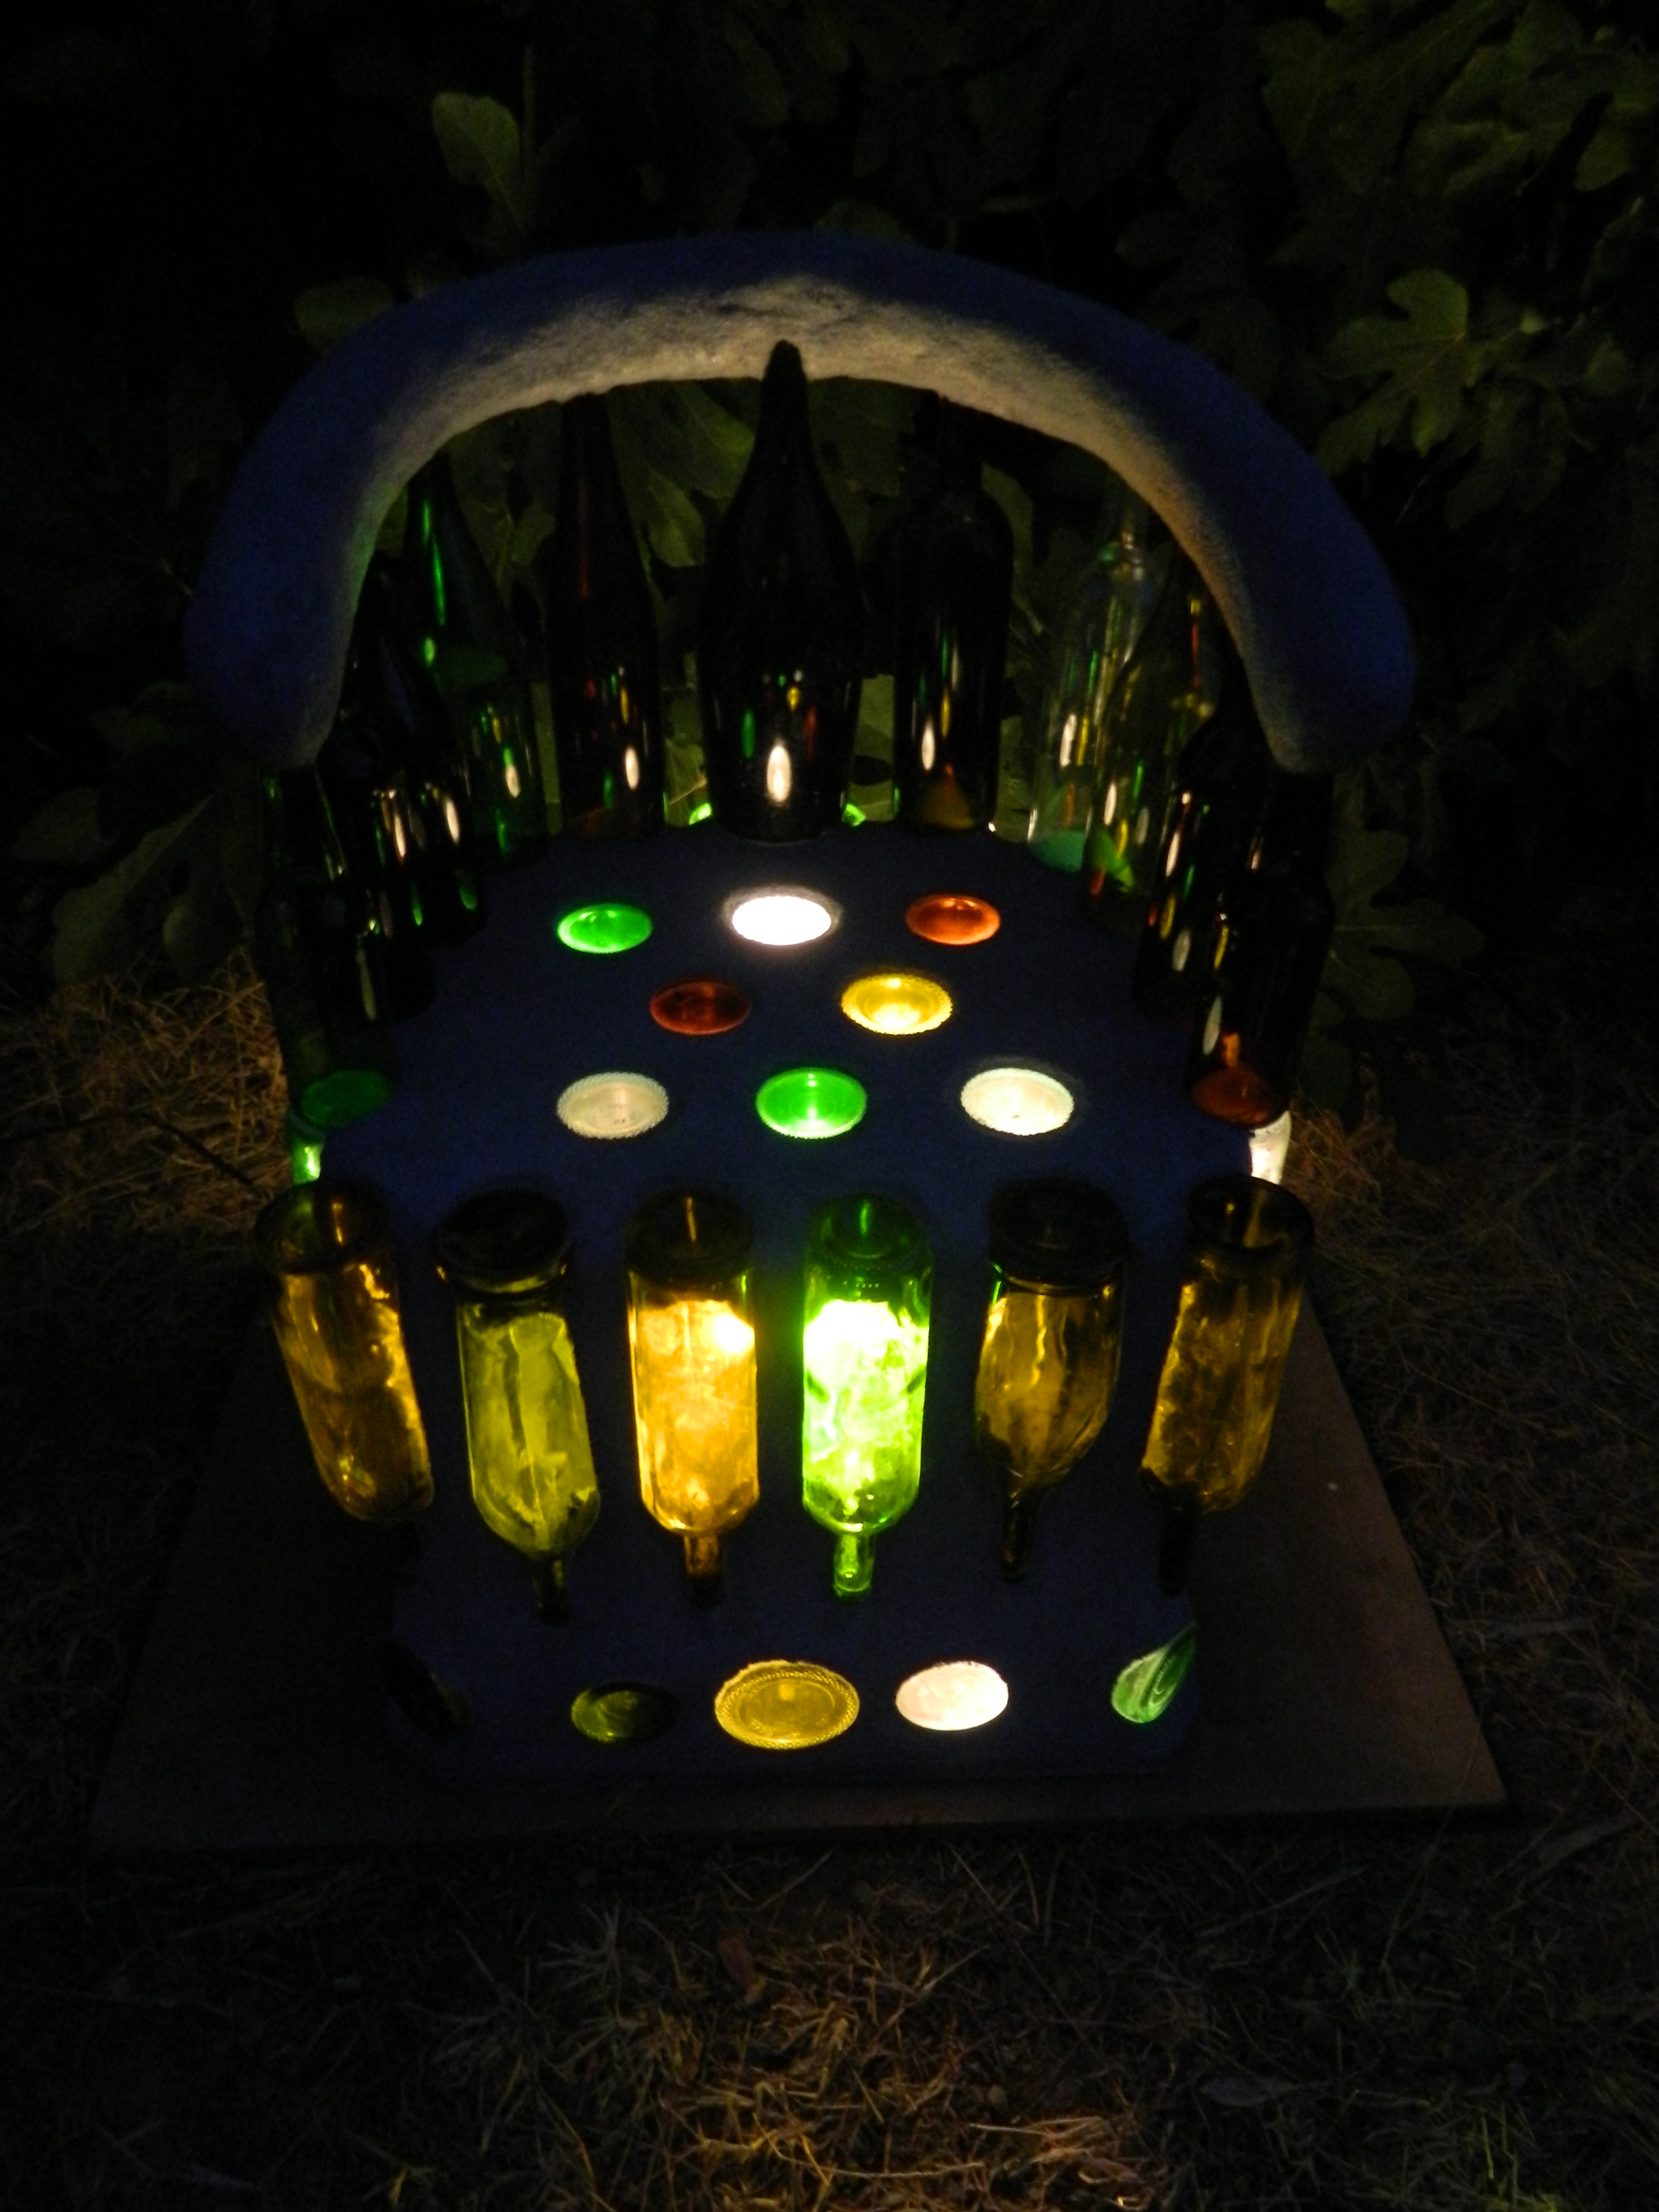  Wine Seat (Illuminated) Glass bottles and cement 34"x24"x20" 2013 